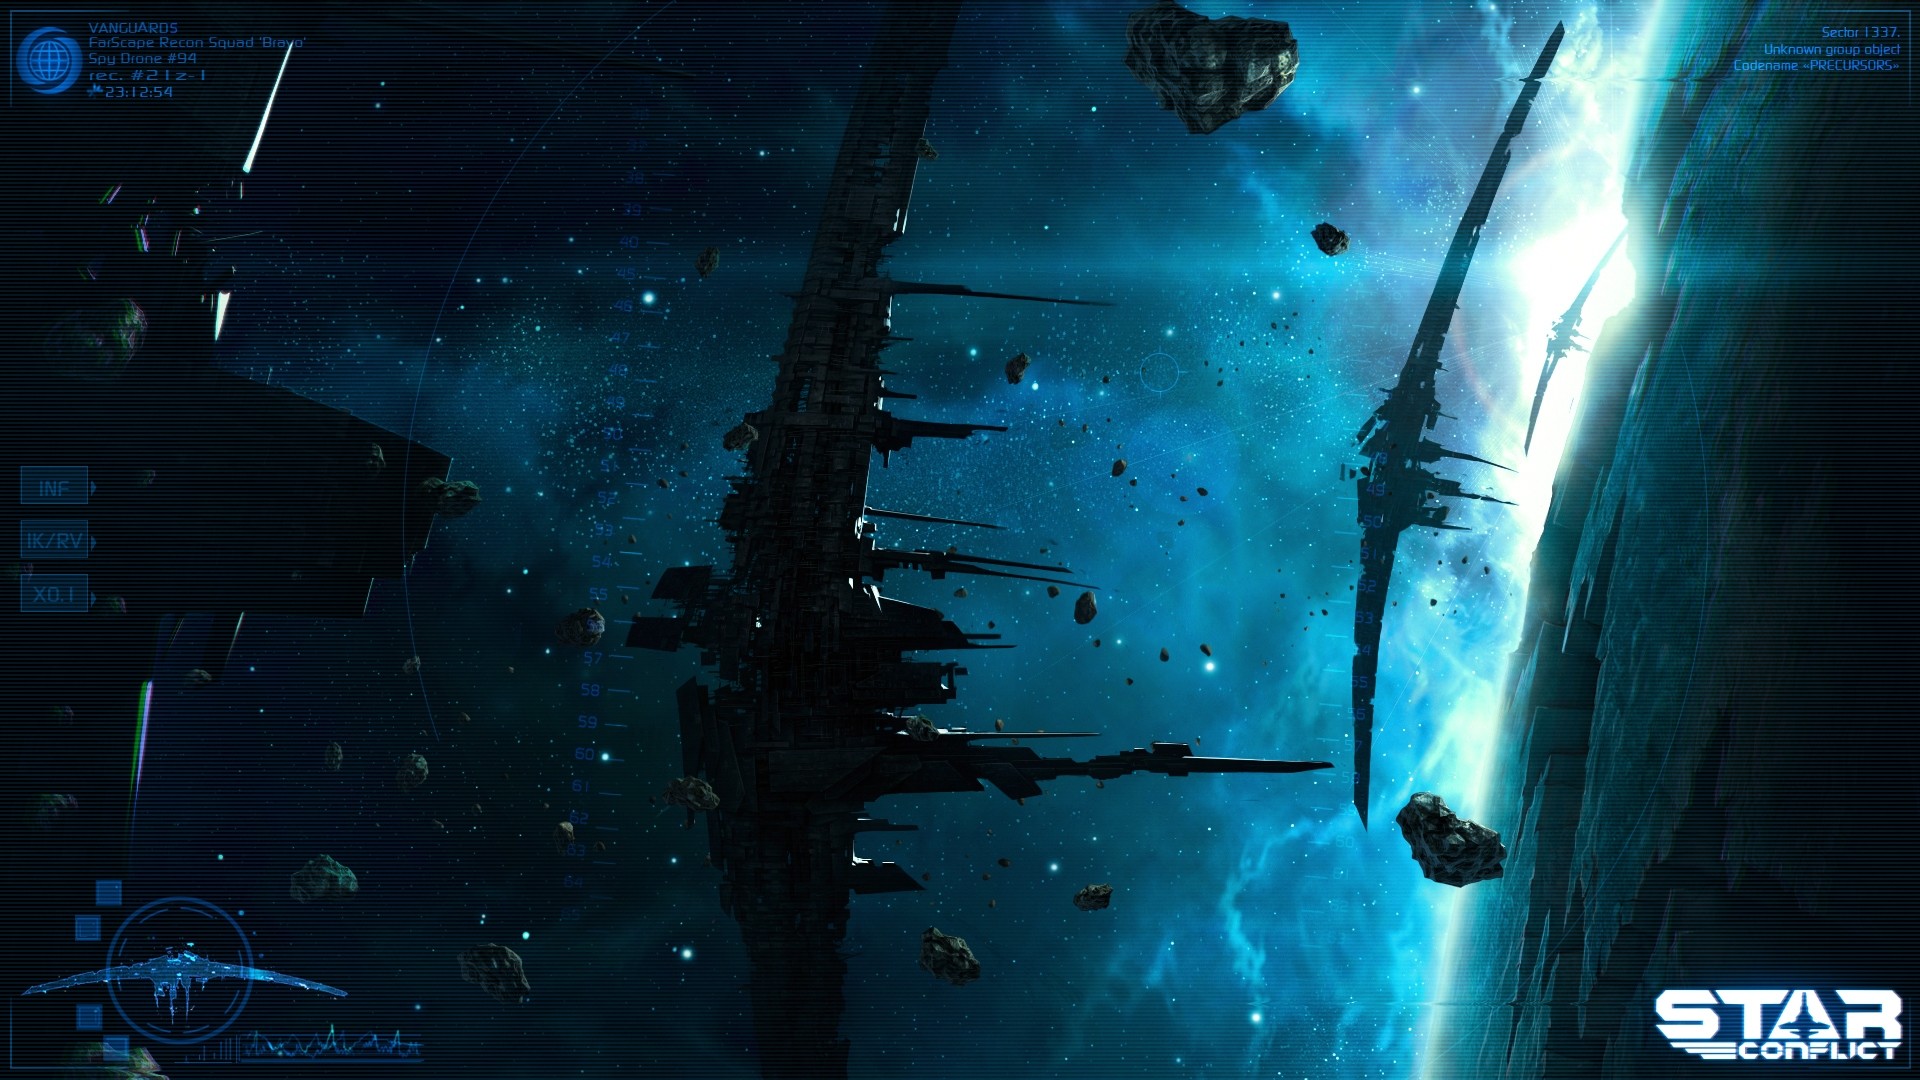 video, Games, Outer, Space, Stars, Fantasy, Art, Science, Fiction, Conflict Wallpaper